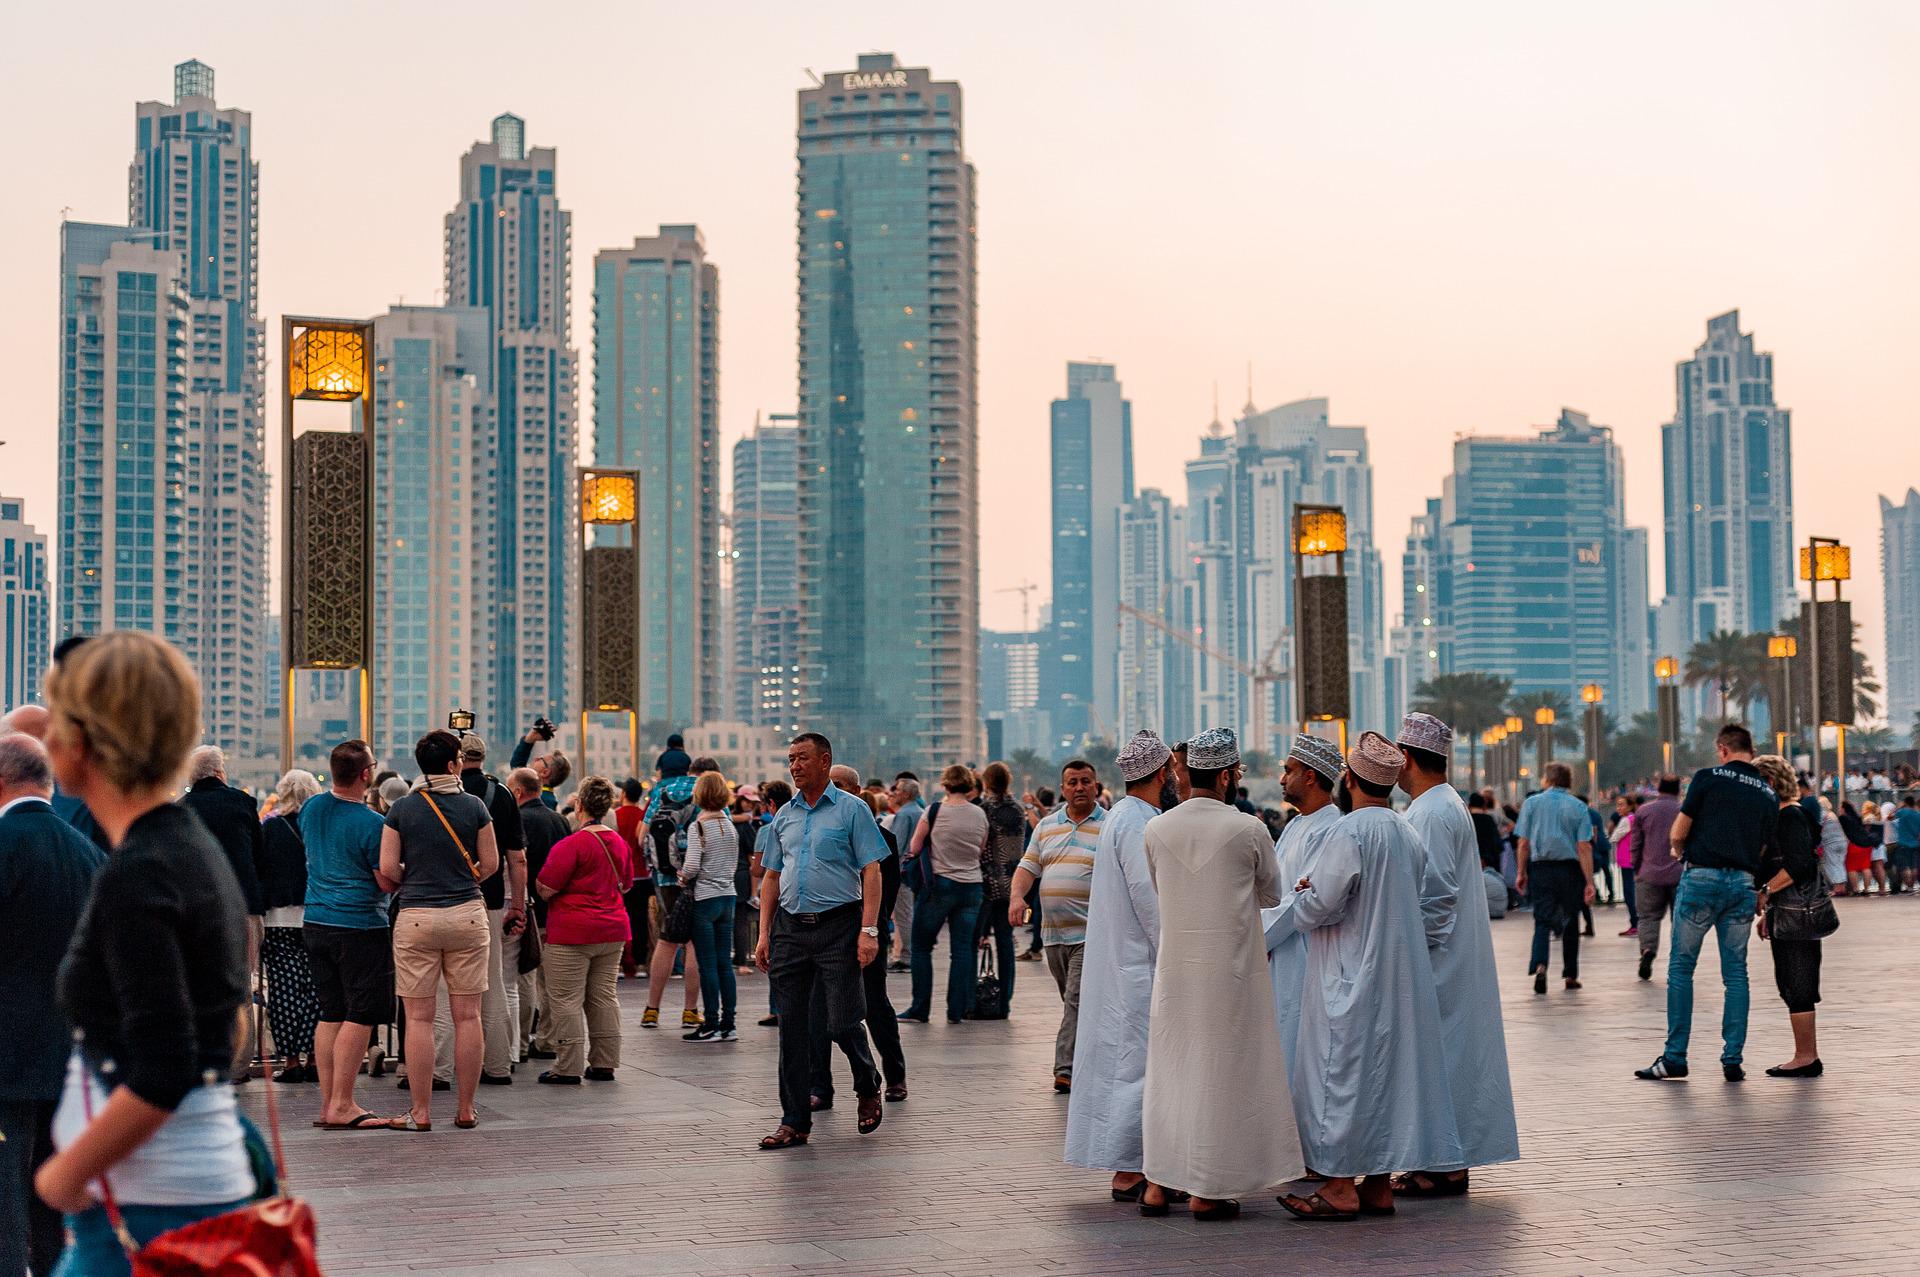 Do you Plan to Visit Dubai? Here's How to Book Tours to Have a Great Time